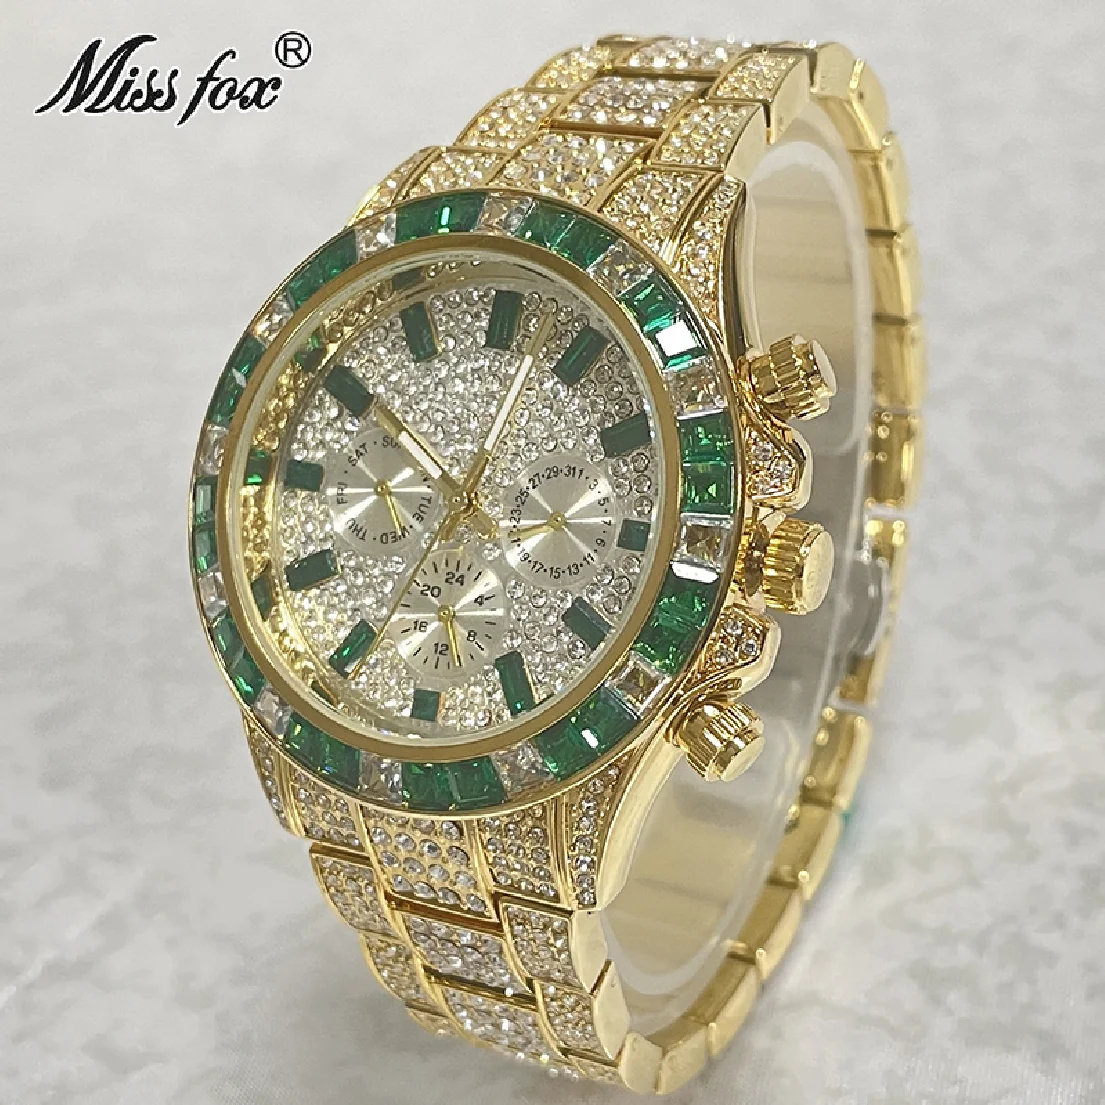 

Luxury Brand New Green Iced Out Fashion Watches Men HipHop Gold Waterproof Wristwatch Full Moissanite Male Jewelry Clocks Reloj